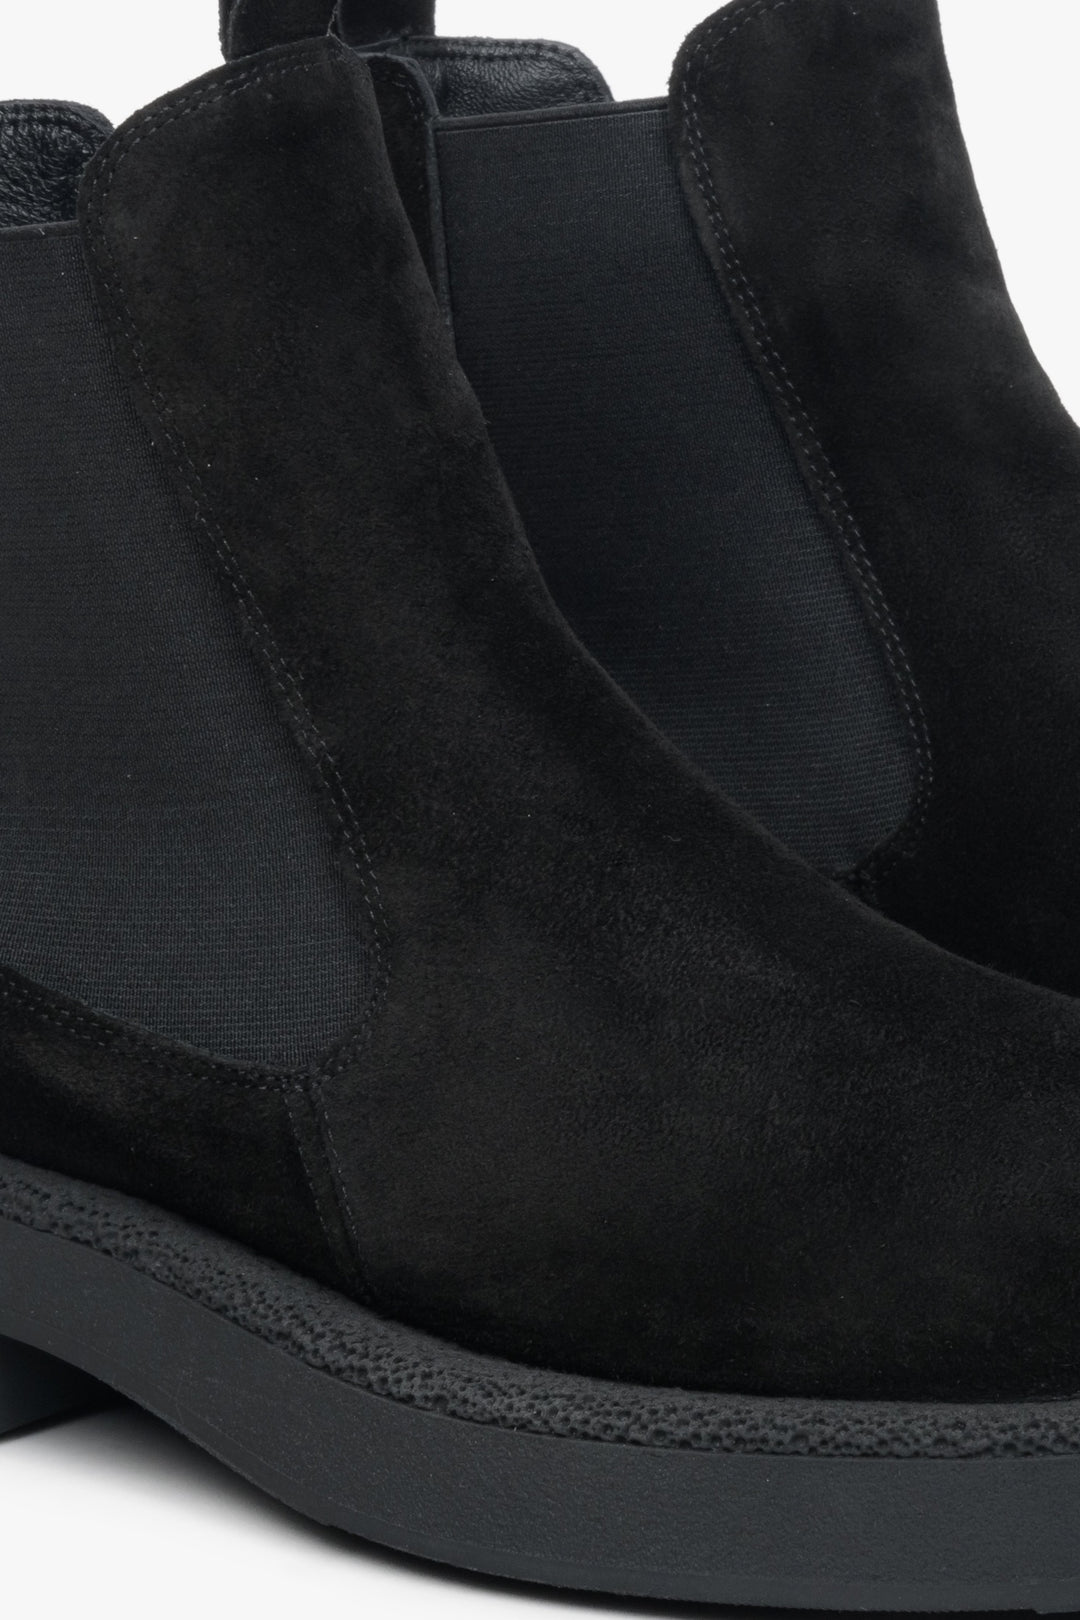 Black suede women's Chelsea boots - a close-up on details.